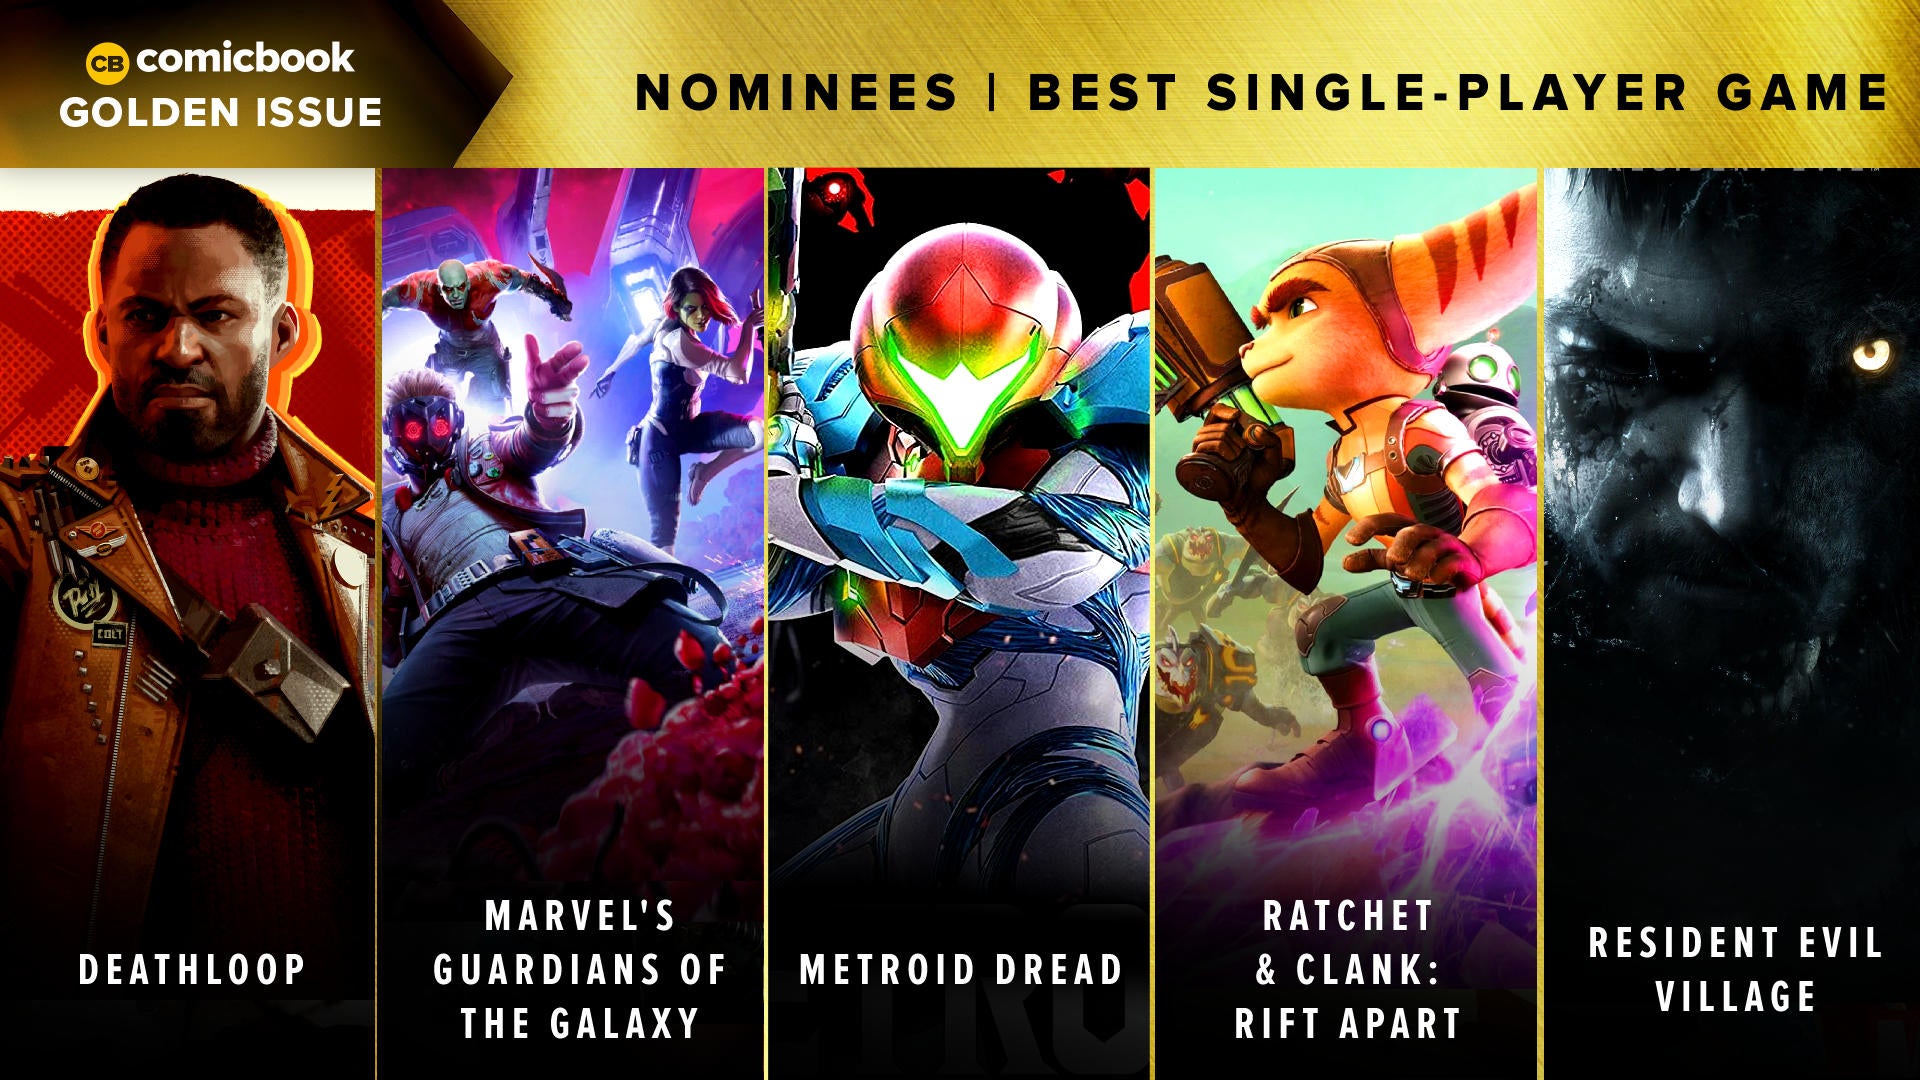 golden-issues-2021-nominees-best-single-player-game.jpg